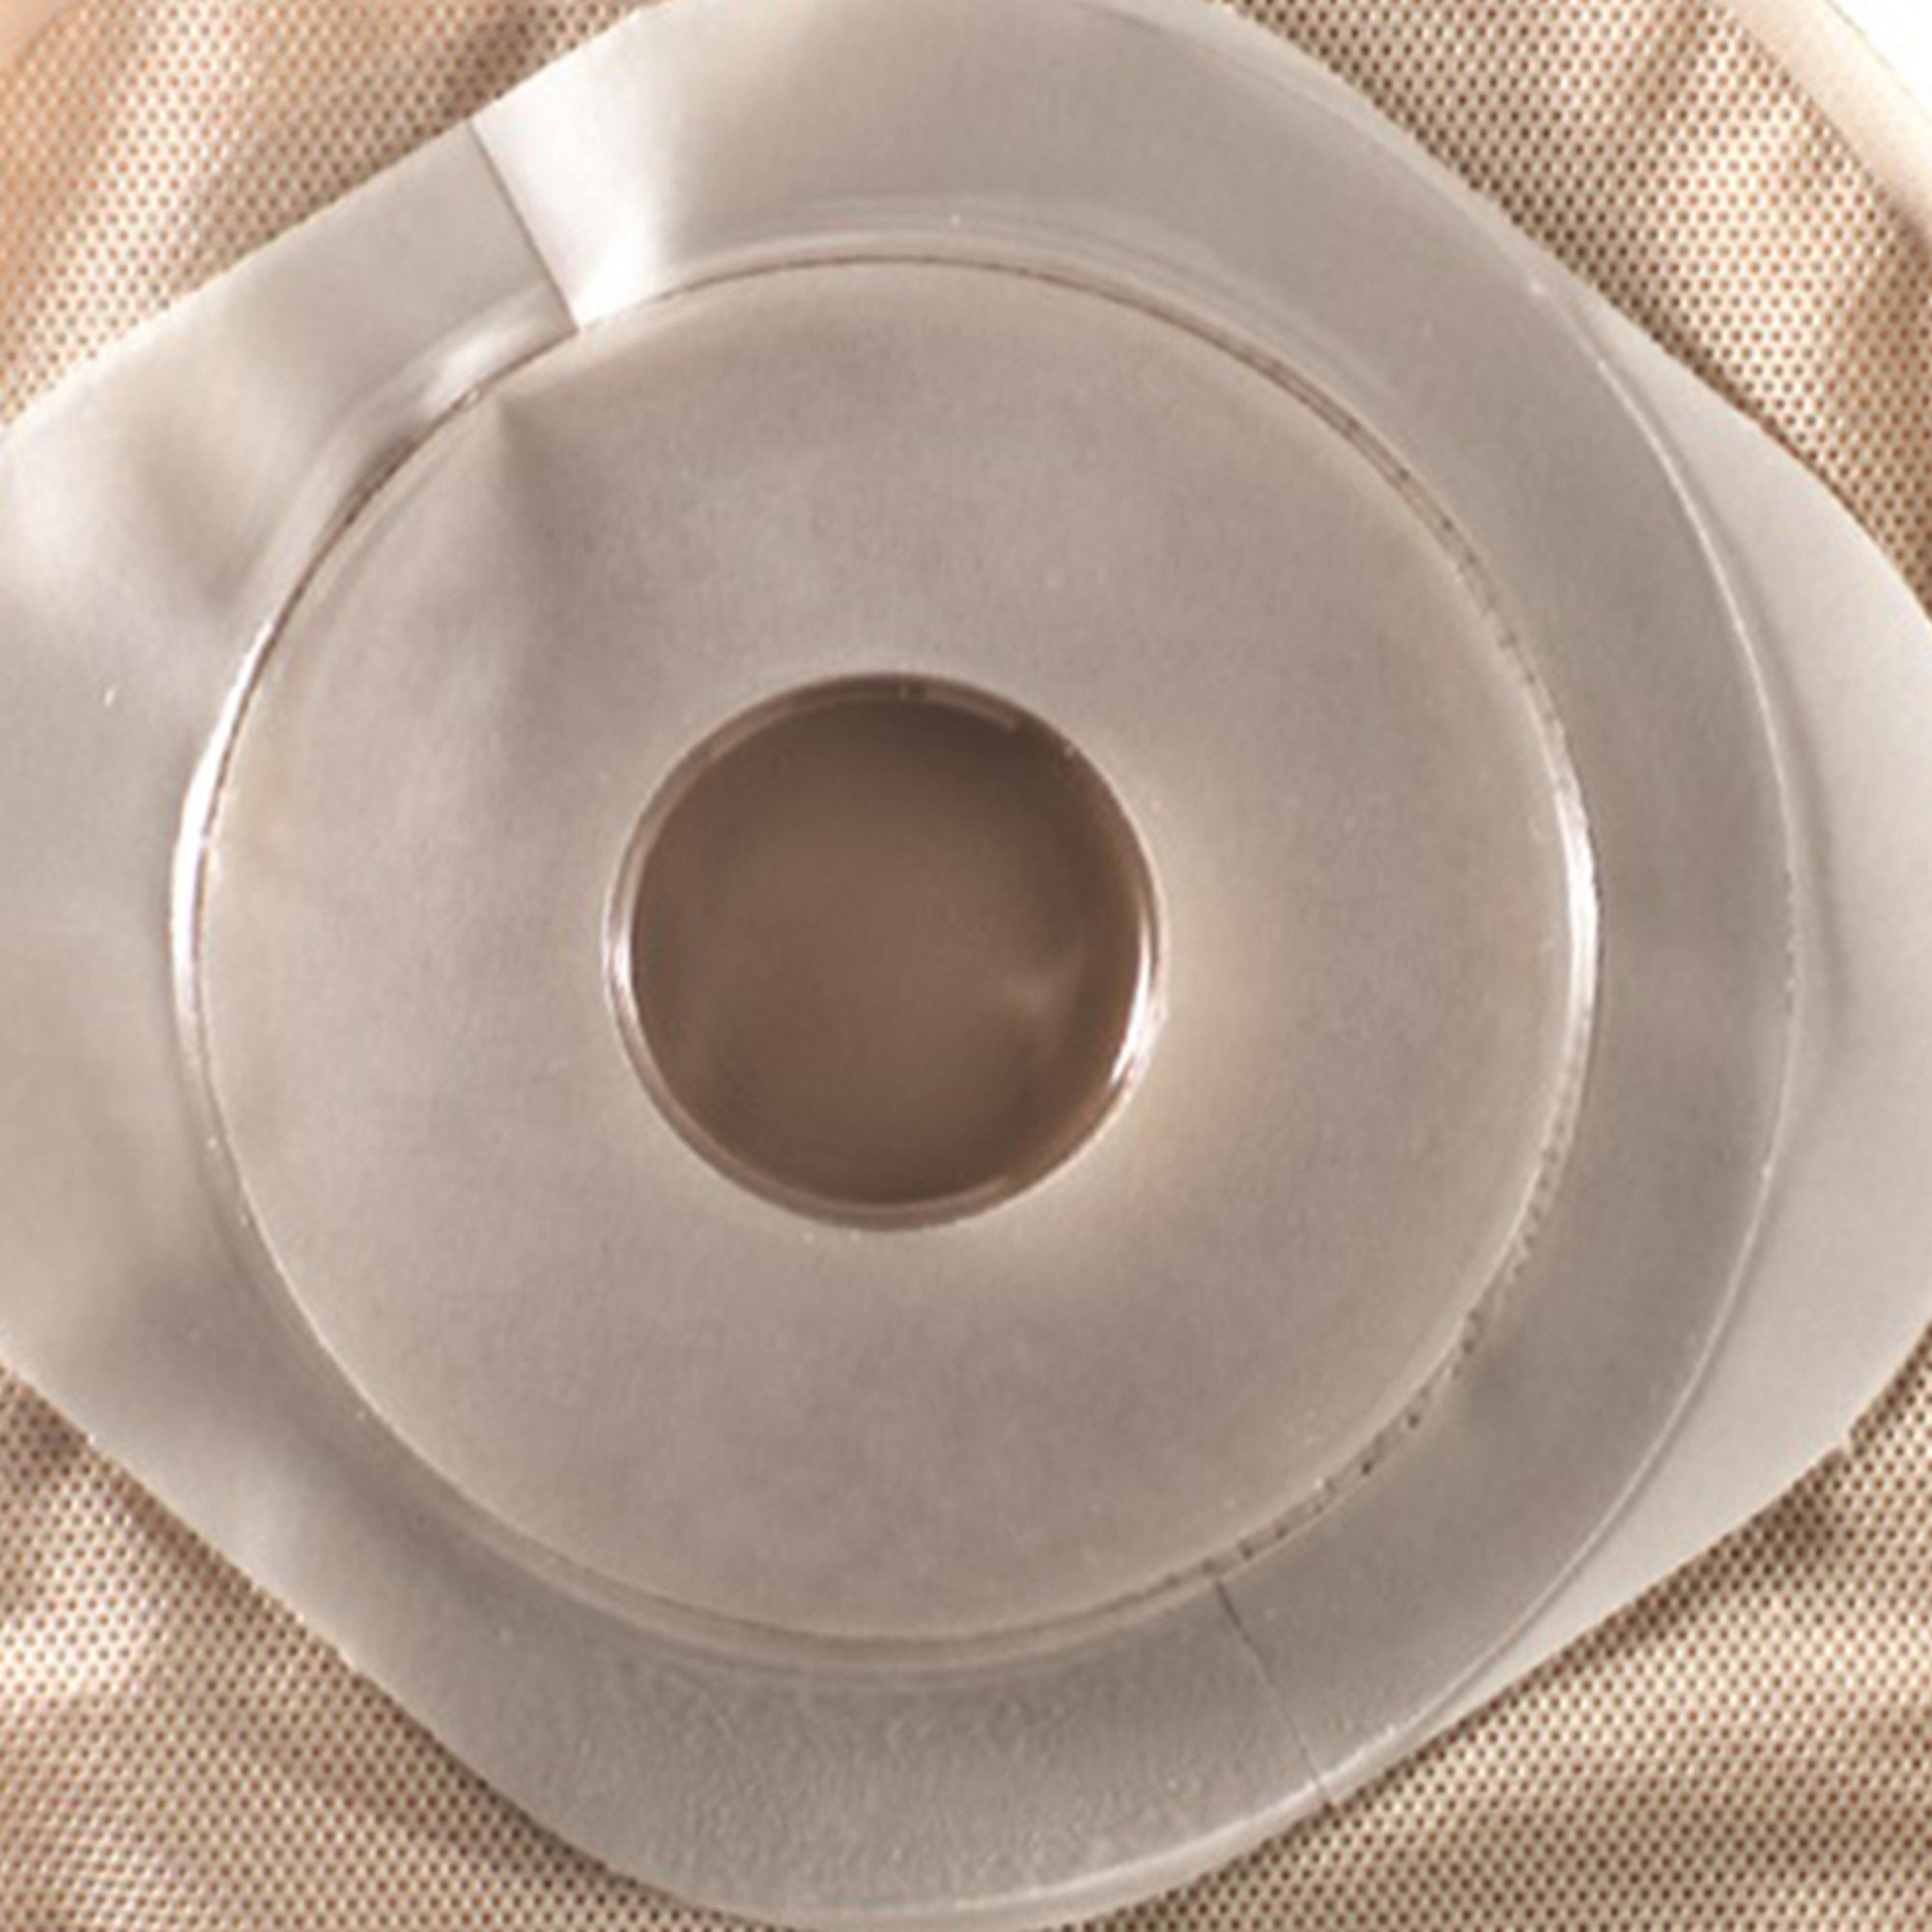 Colostomy Pouch ActiveLife® One-Piece System 10 Inch Length Flat, Pre-Cut 1 Inch Stoma Drainable